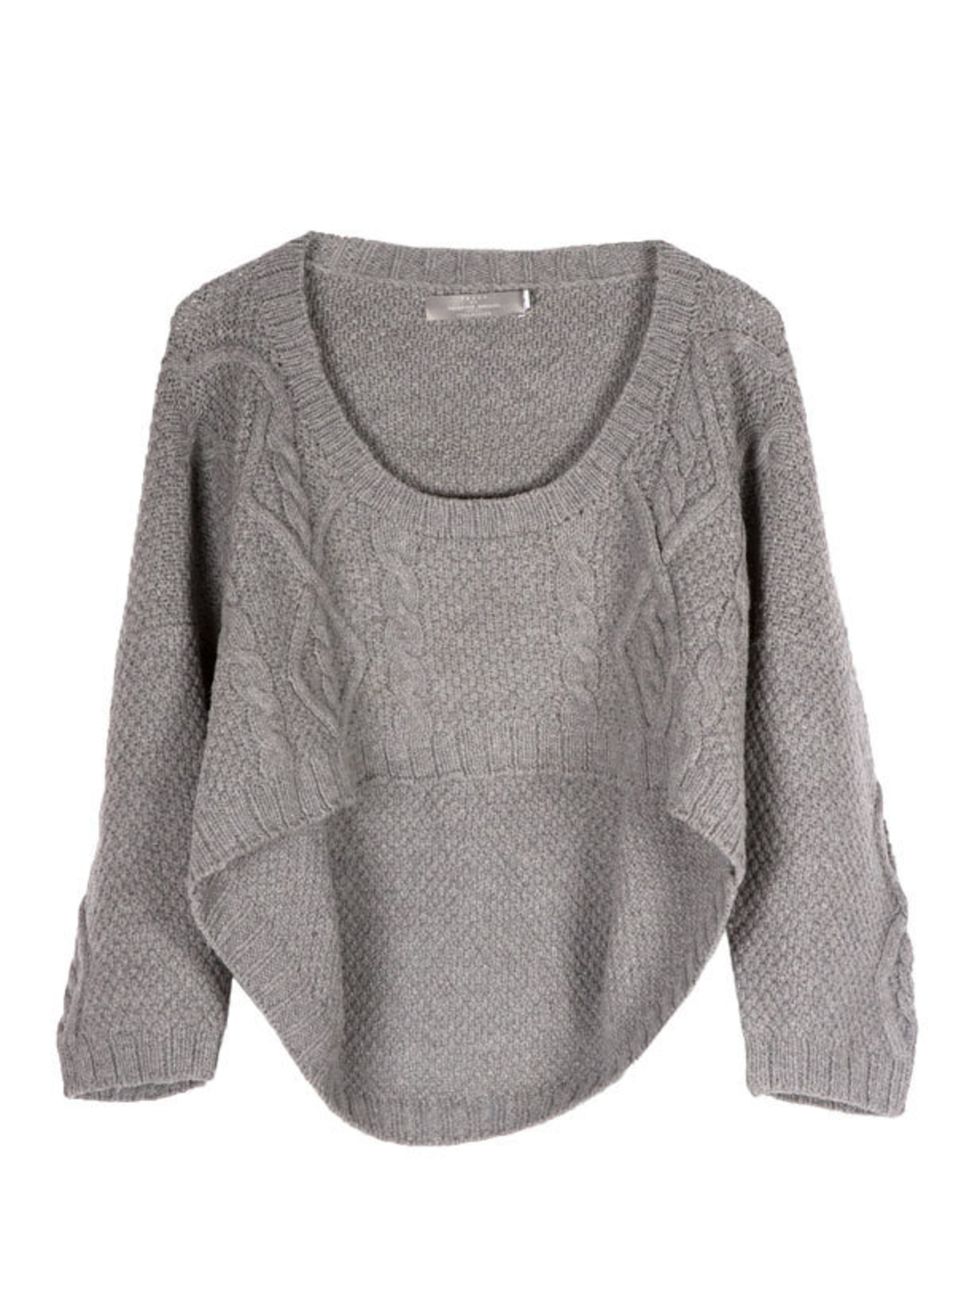 <p>Preen cropped cable knit jumper, £470, at <a href="http://www.start-london.com/designers/womens/preen/cropped-cable-knit-sweater-4738.html">Start London</a></p>